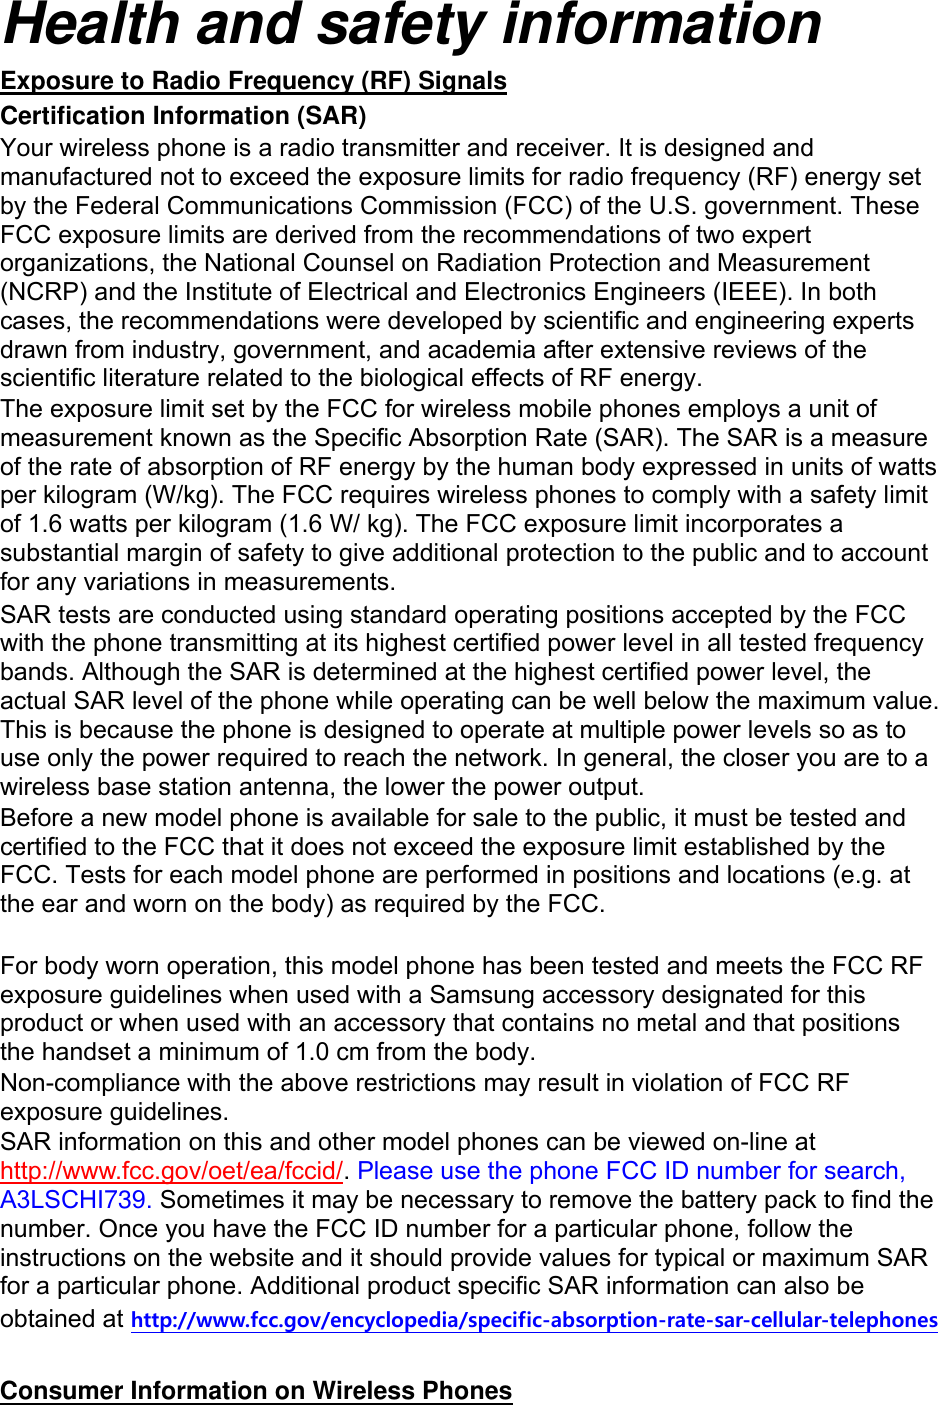 Health and safety information Exposure to Radio Frequency (RF) Signals Certification Information (SAR) Your wireless phone is a radio transmitter and receiver. It is designed and manufactured not to exceed the exposure limits for radio frequency (RF) energy set by the Federal Communications Commission (FCC) of the U.S. government. These FCC exposure limits are derived from the recommendations of two expert organizations, the National Counsel on Radiation Protection and Measurement (NCRP) and the Institute of Electrical and Electronics Engineers (IEEE). In both cases, the recommendations were developed by scientific and engineering experts drawn from industry, government, and academia after extensive reviews of the scientific literature related to the biological effects of RF energy. The exposure limit set by the FCC for wireless mobile phones employs a unit of measurement known as the Specific Absorption Rate (SAR). The SAR is a measure of the rate of absorption of RF energy by the human body expressed in units of watts per kilogram (W/kg). The FCC requires wireless phones to comply with a safety limit of 1.6 watts per kilogram (1.6 W/ kg). The FCC exposure limit incorporates a substantial margin of safety to give additional protection to the public and to account for any variations in measurements. SAR tests are conducted using standard operating positions accepted by the FCC with the phone transmitting at its highest certified power level in all tested frequency bands. Although the SAR is determined at the highest certified power level, the actual SAR level of the phone while operating can be well below the maximum value. This is because the phone is designed to operate at multiple power levels so as to use only the power required to reach the network. In general, the closer you are to a wireless base station antenna, the lower the power output. Before a new model phone is available for sale to the public, it must be tested and certified to the FCC that it does not exceed the exposure limit established by the FCC. Tests for each model phone are performed in positions and locations (e.g. at the ear and worn on the body) as required by the FCC.      For body worn operation, this model phone has been tested and meets the FCC RF exposure guidelines when used with a Samsung accessory designated for this product or when used with an accessory that contains no metal and that positions the handset a minimum of 1.0 cm from the body.   Non-compliance with the above restrictions may result in violation of FCC RF exposure guidelines. SAR information on this and other model phones can be viewed on-line at http://www.fcc.gov/oet/ea/fccid/. Please use the phone FCC ID number for search, A3LSCHI739. Sometimes it may be necessary to remove the battery pack to find the number. Once you have the FCC ID number for a particular phone, follow the instructions on the website and it should provide values for typical or maximum SAR for a particular phone. Additional product specific SAR information can also be obtained at http://www.fcc.gov/encyclopedia/specific-absorption-rate-sar-cellular-telephones  Consumer Information on Wireless Phones 